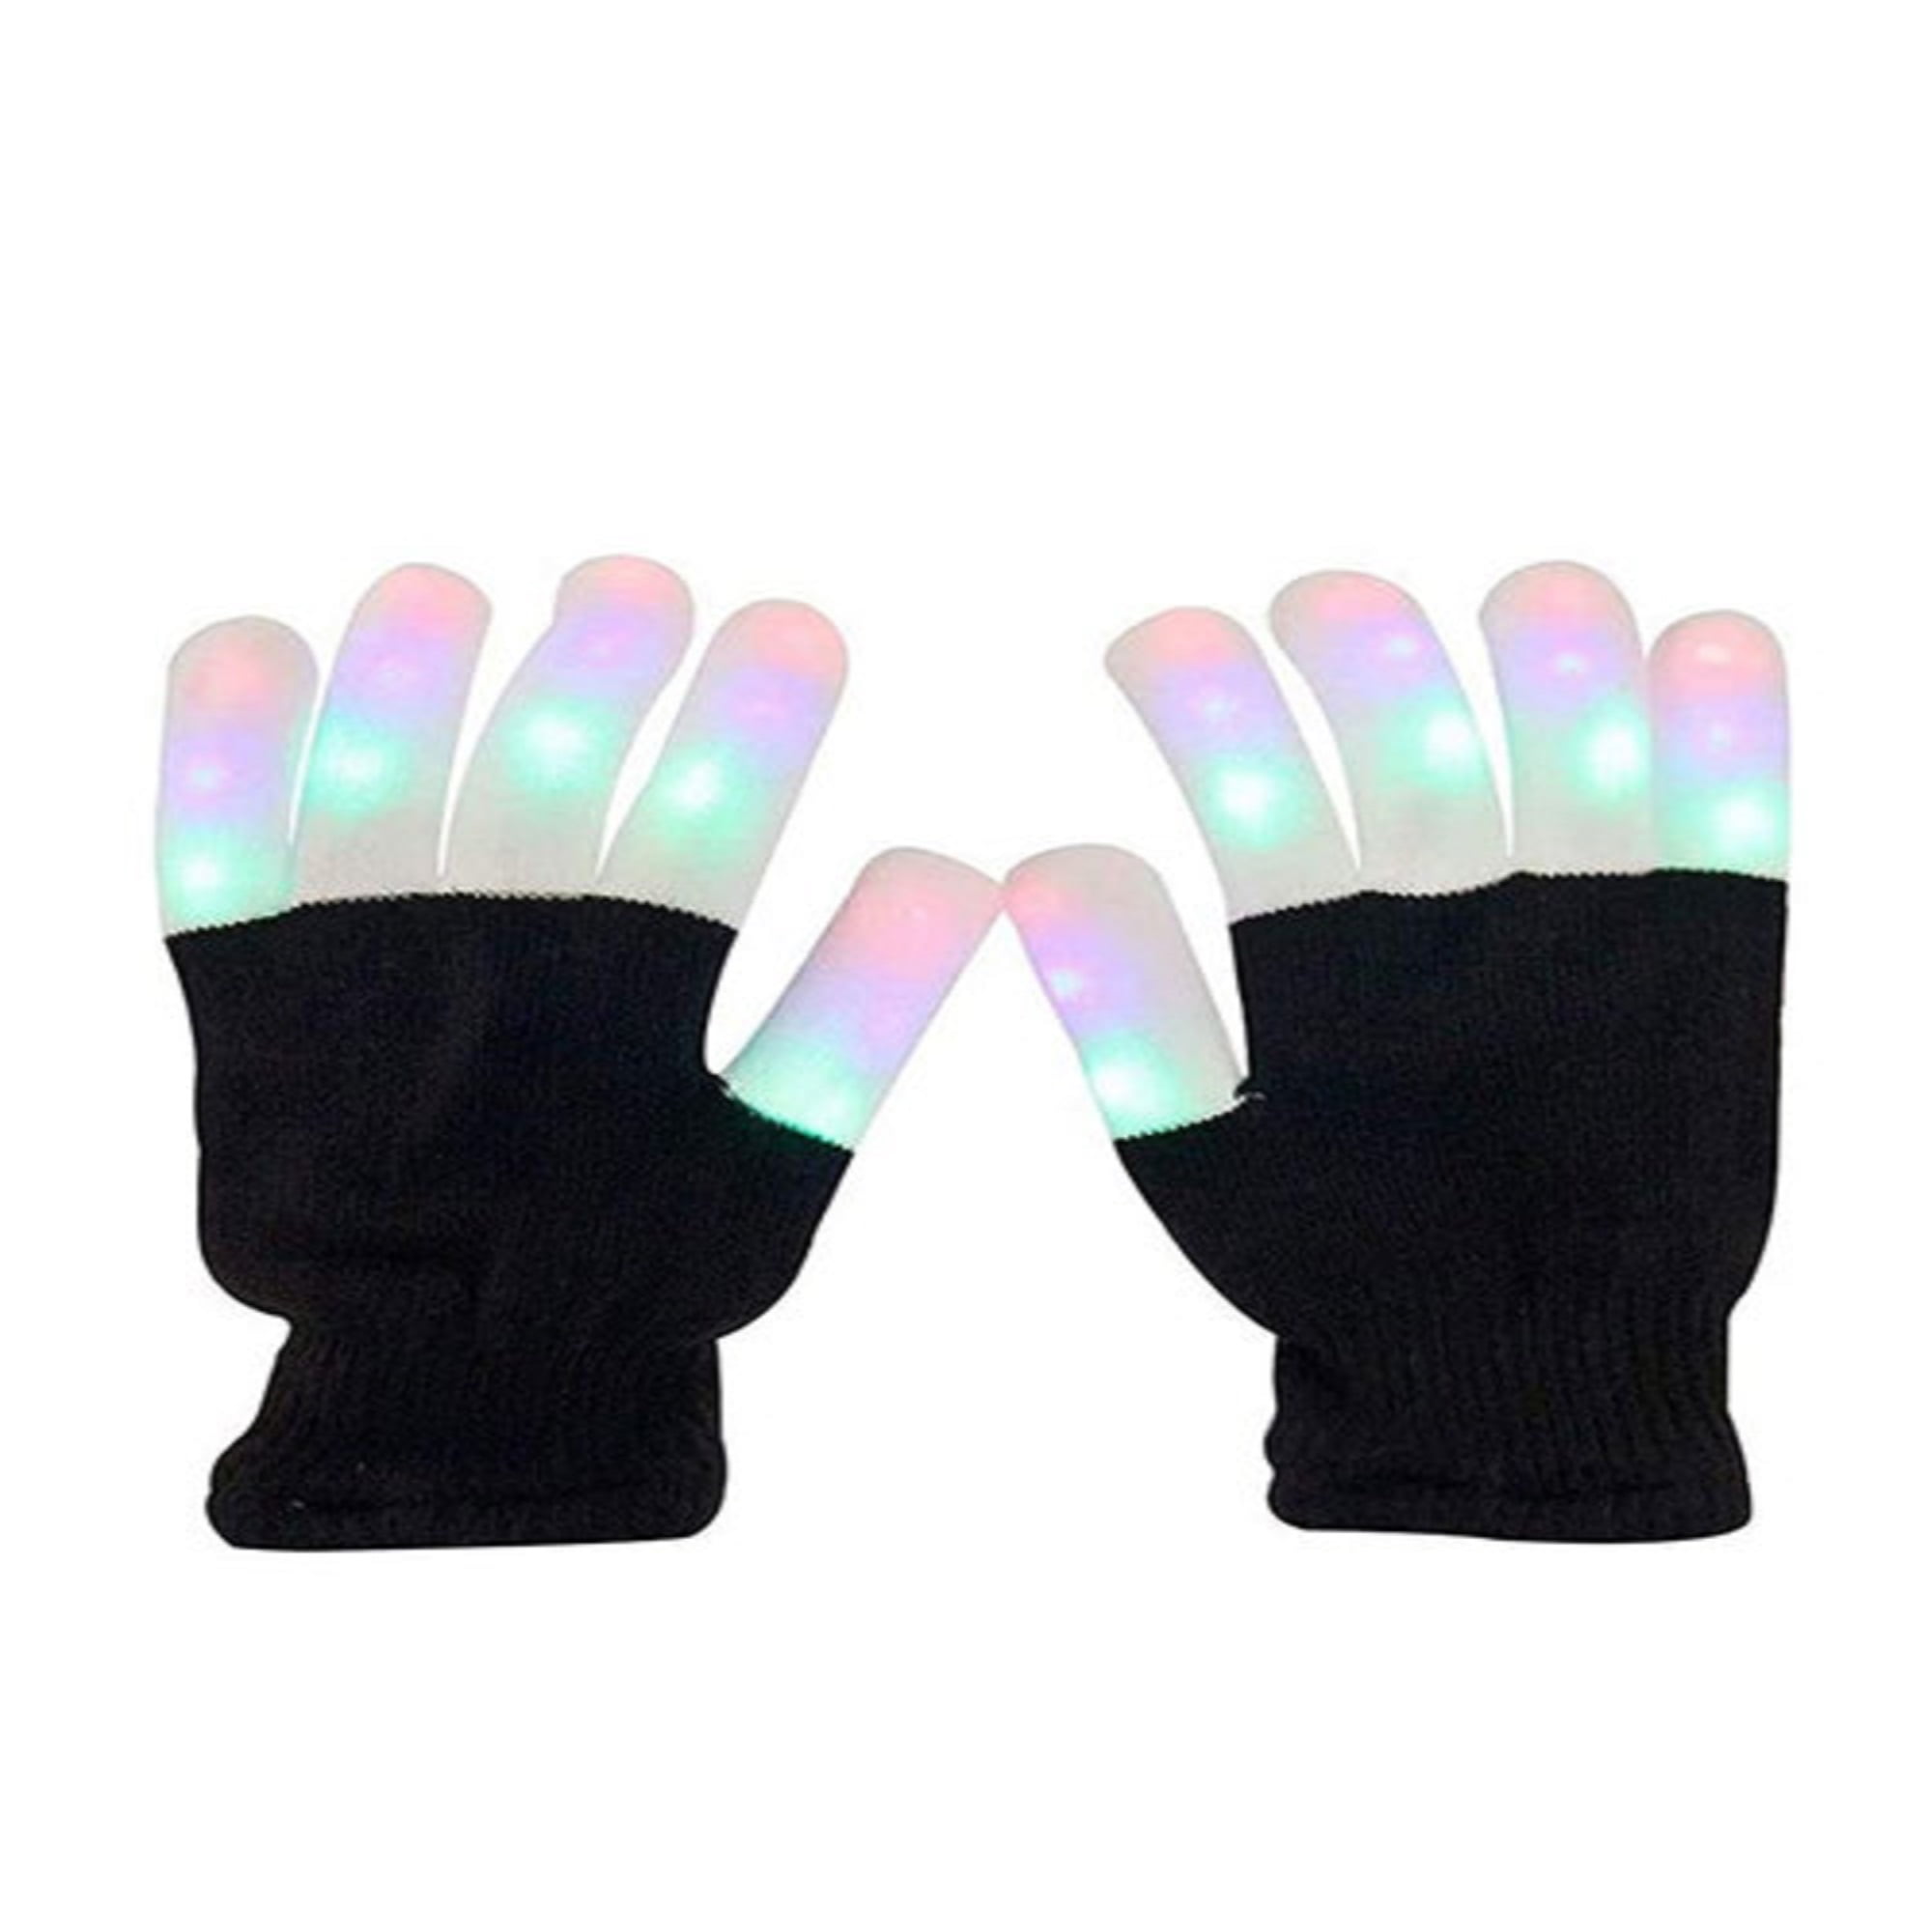 LED Finger Light Gloves Colorful Lighting Rave Party Holiday Hand Lamp